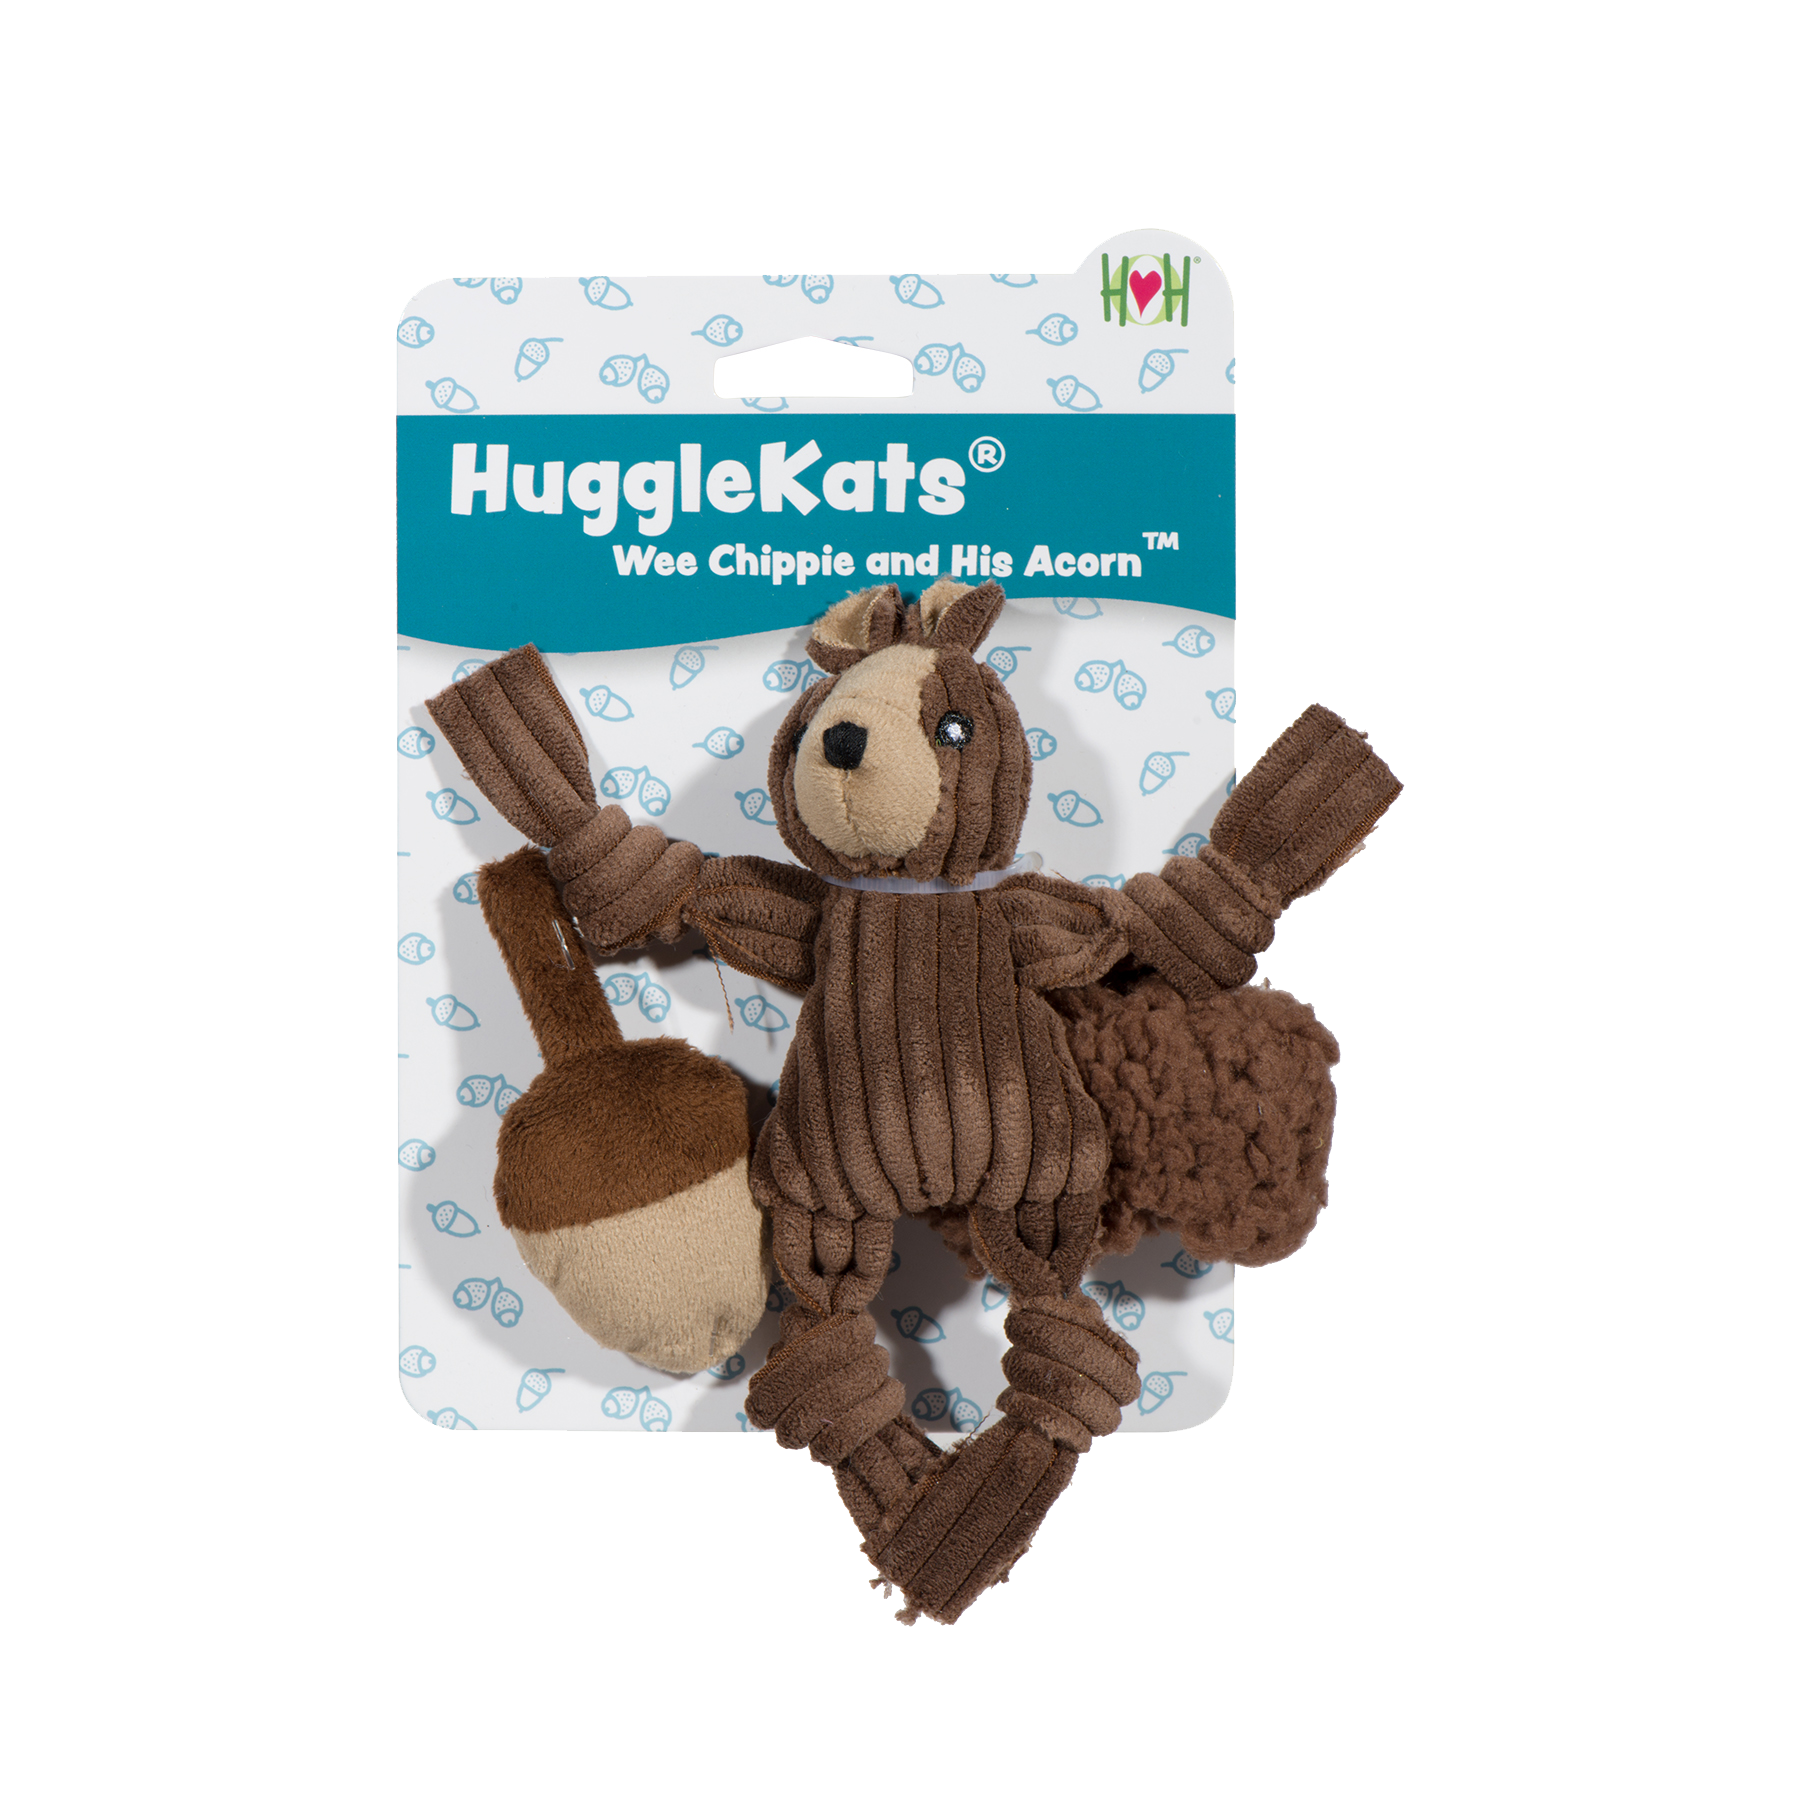 HuggleKats® Wee Chippie and His Acorn Cat Toy Set